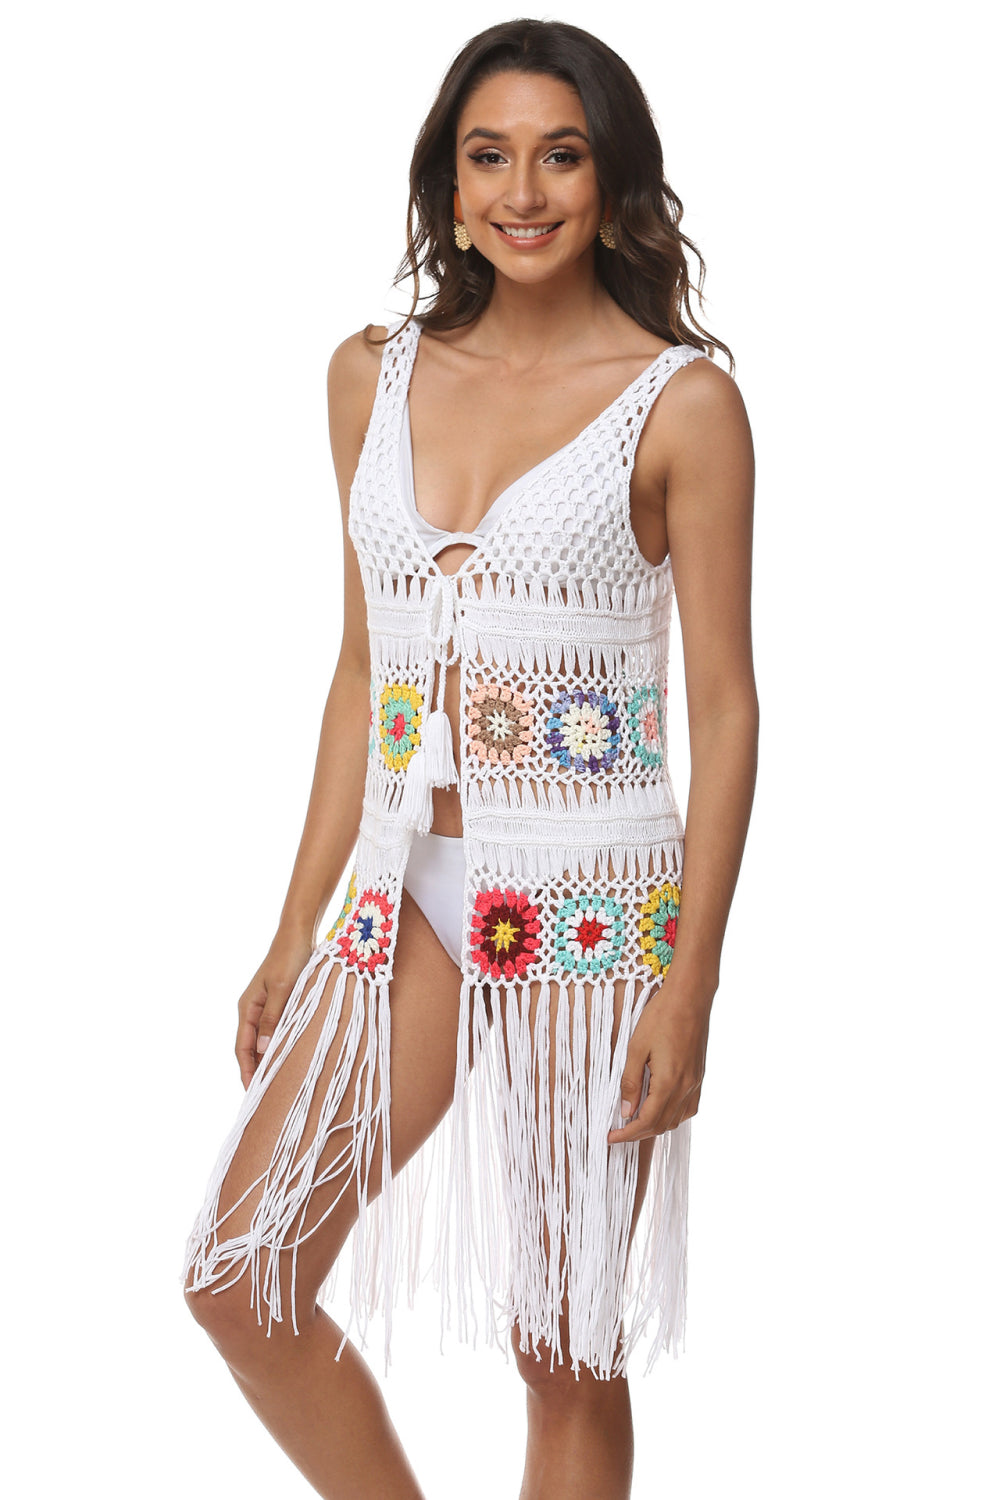 Openwork Fringe Detail Embroidery Sleeveless Cover-Up  Sunset and Swim   